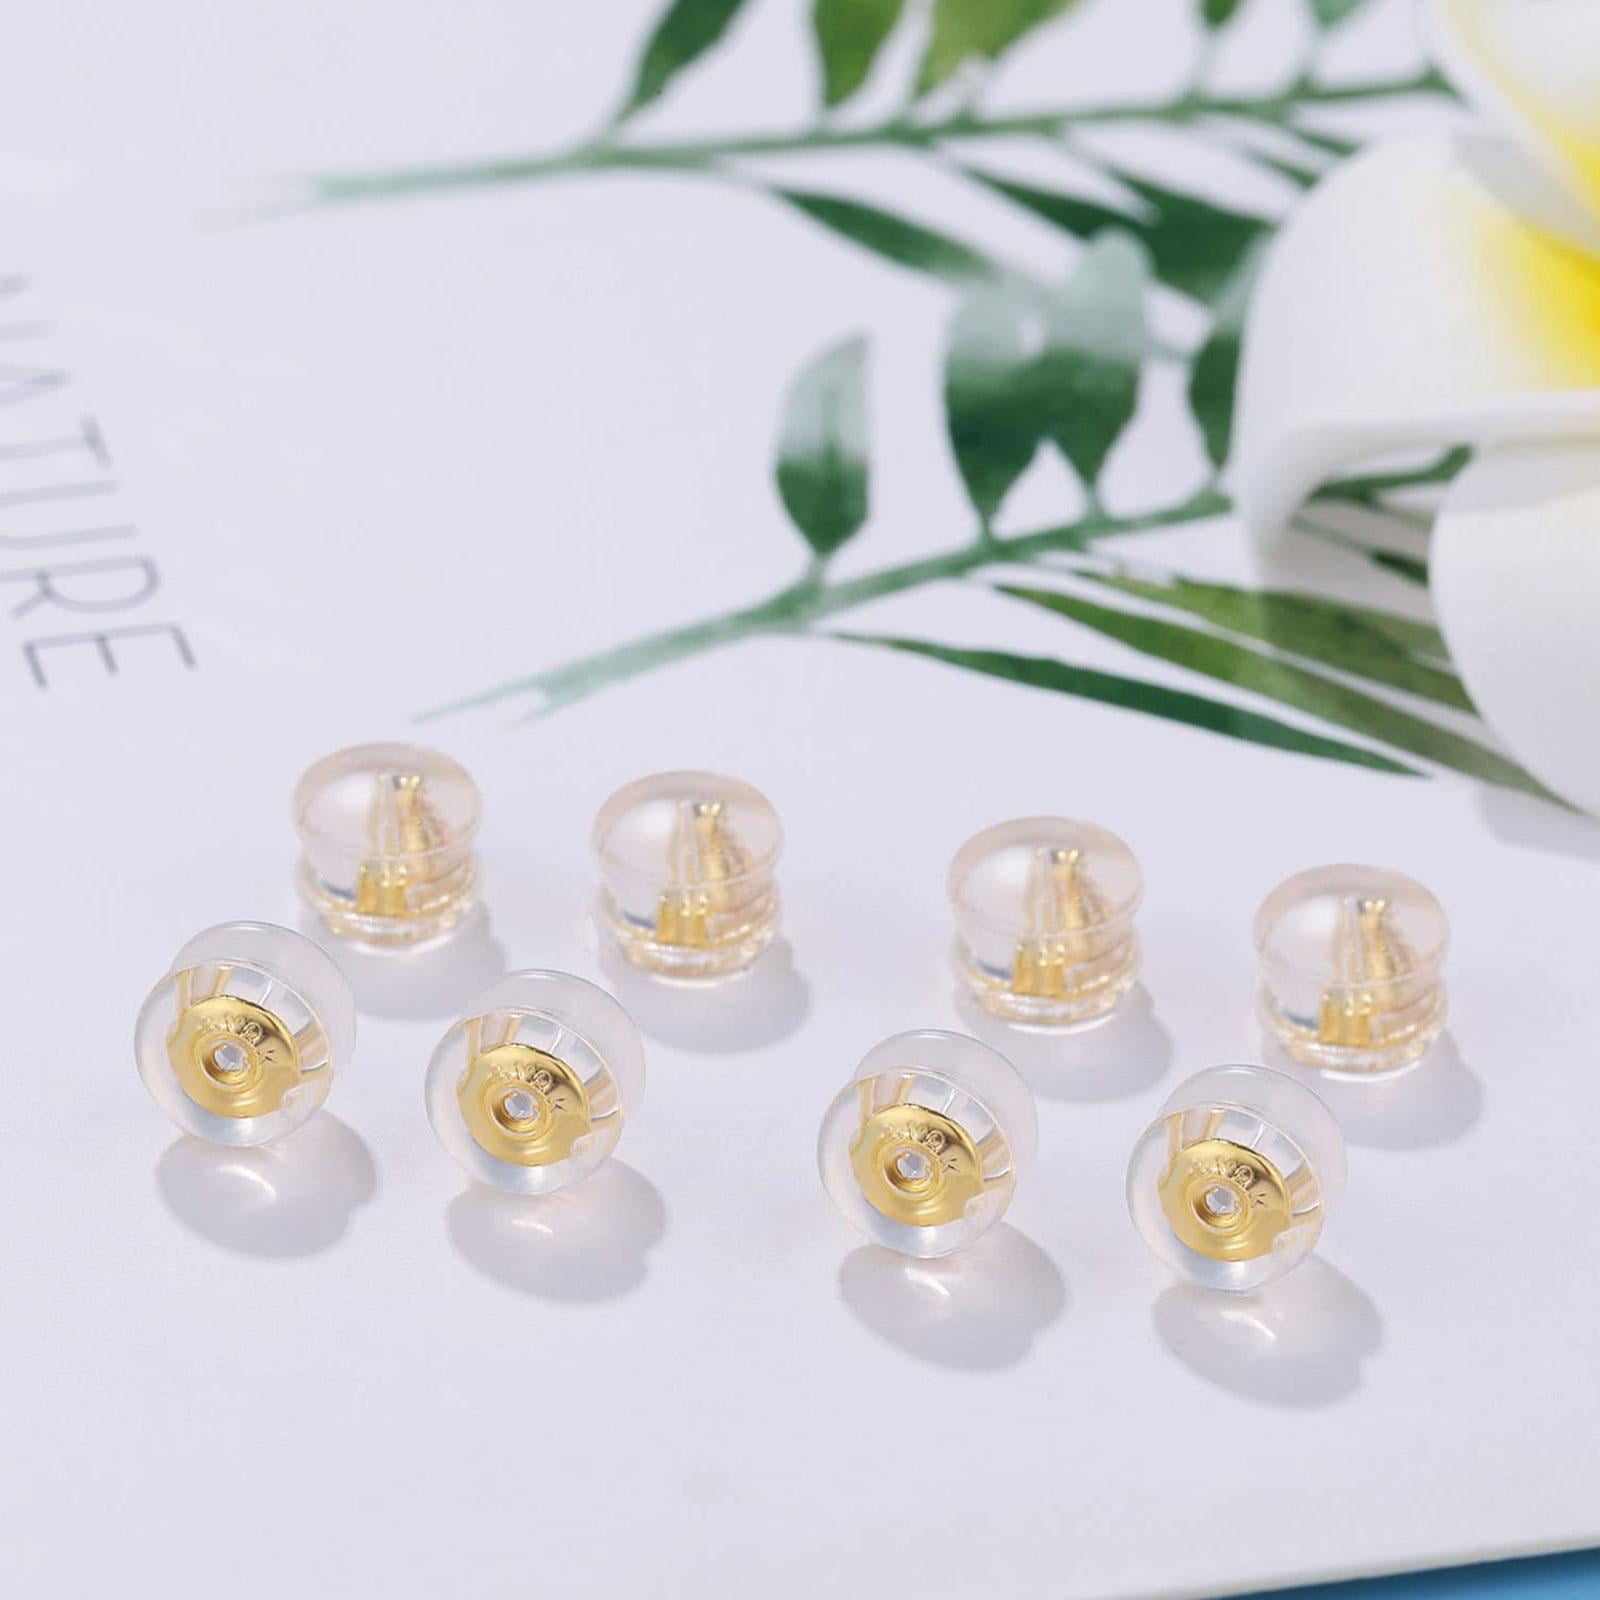 20pcs Secure Earring Backs for Heavy Earrings Stoppers Plastic Discs Gold  Plated – Tacos Y Mas